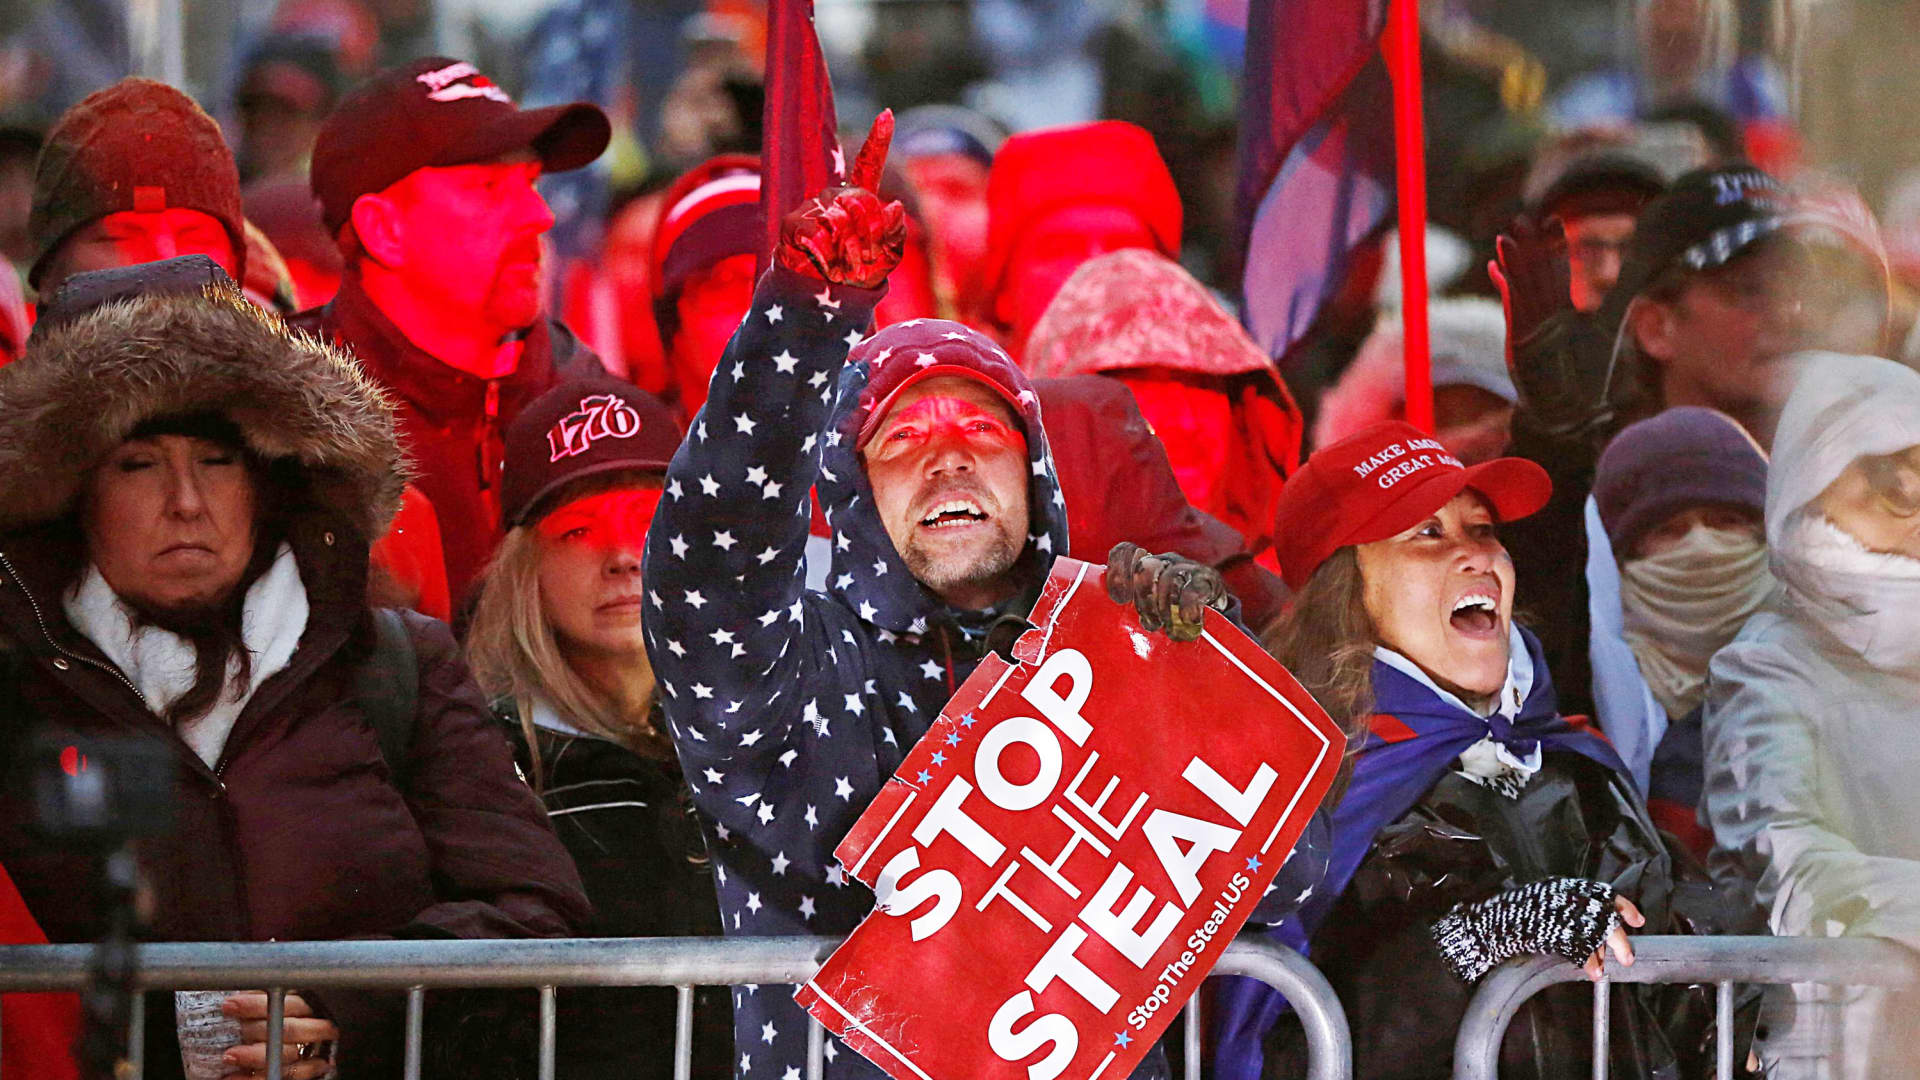 Supporters of U.S. President Donald Trump gather at a rally at Freedom Plaza, ahead of the U.S. Congress certification of the November 2020 election results, during protests in Washington, January 5, 2021.